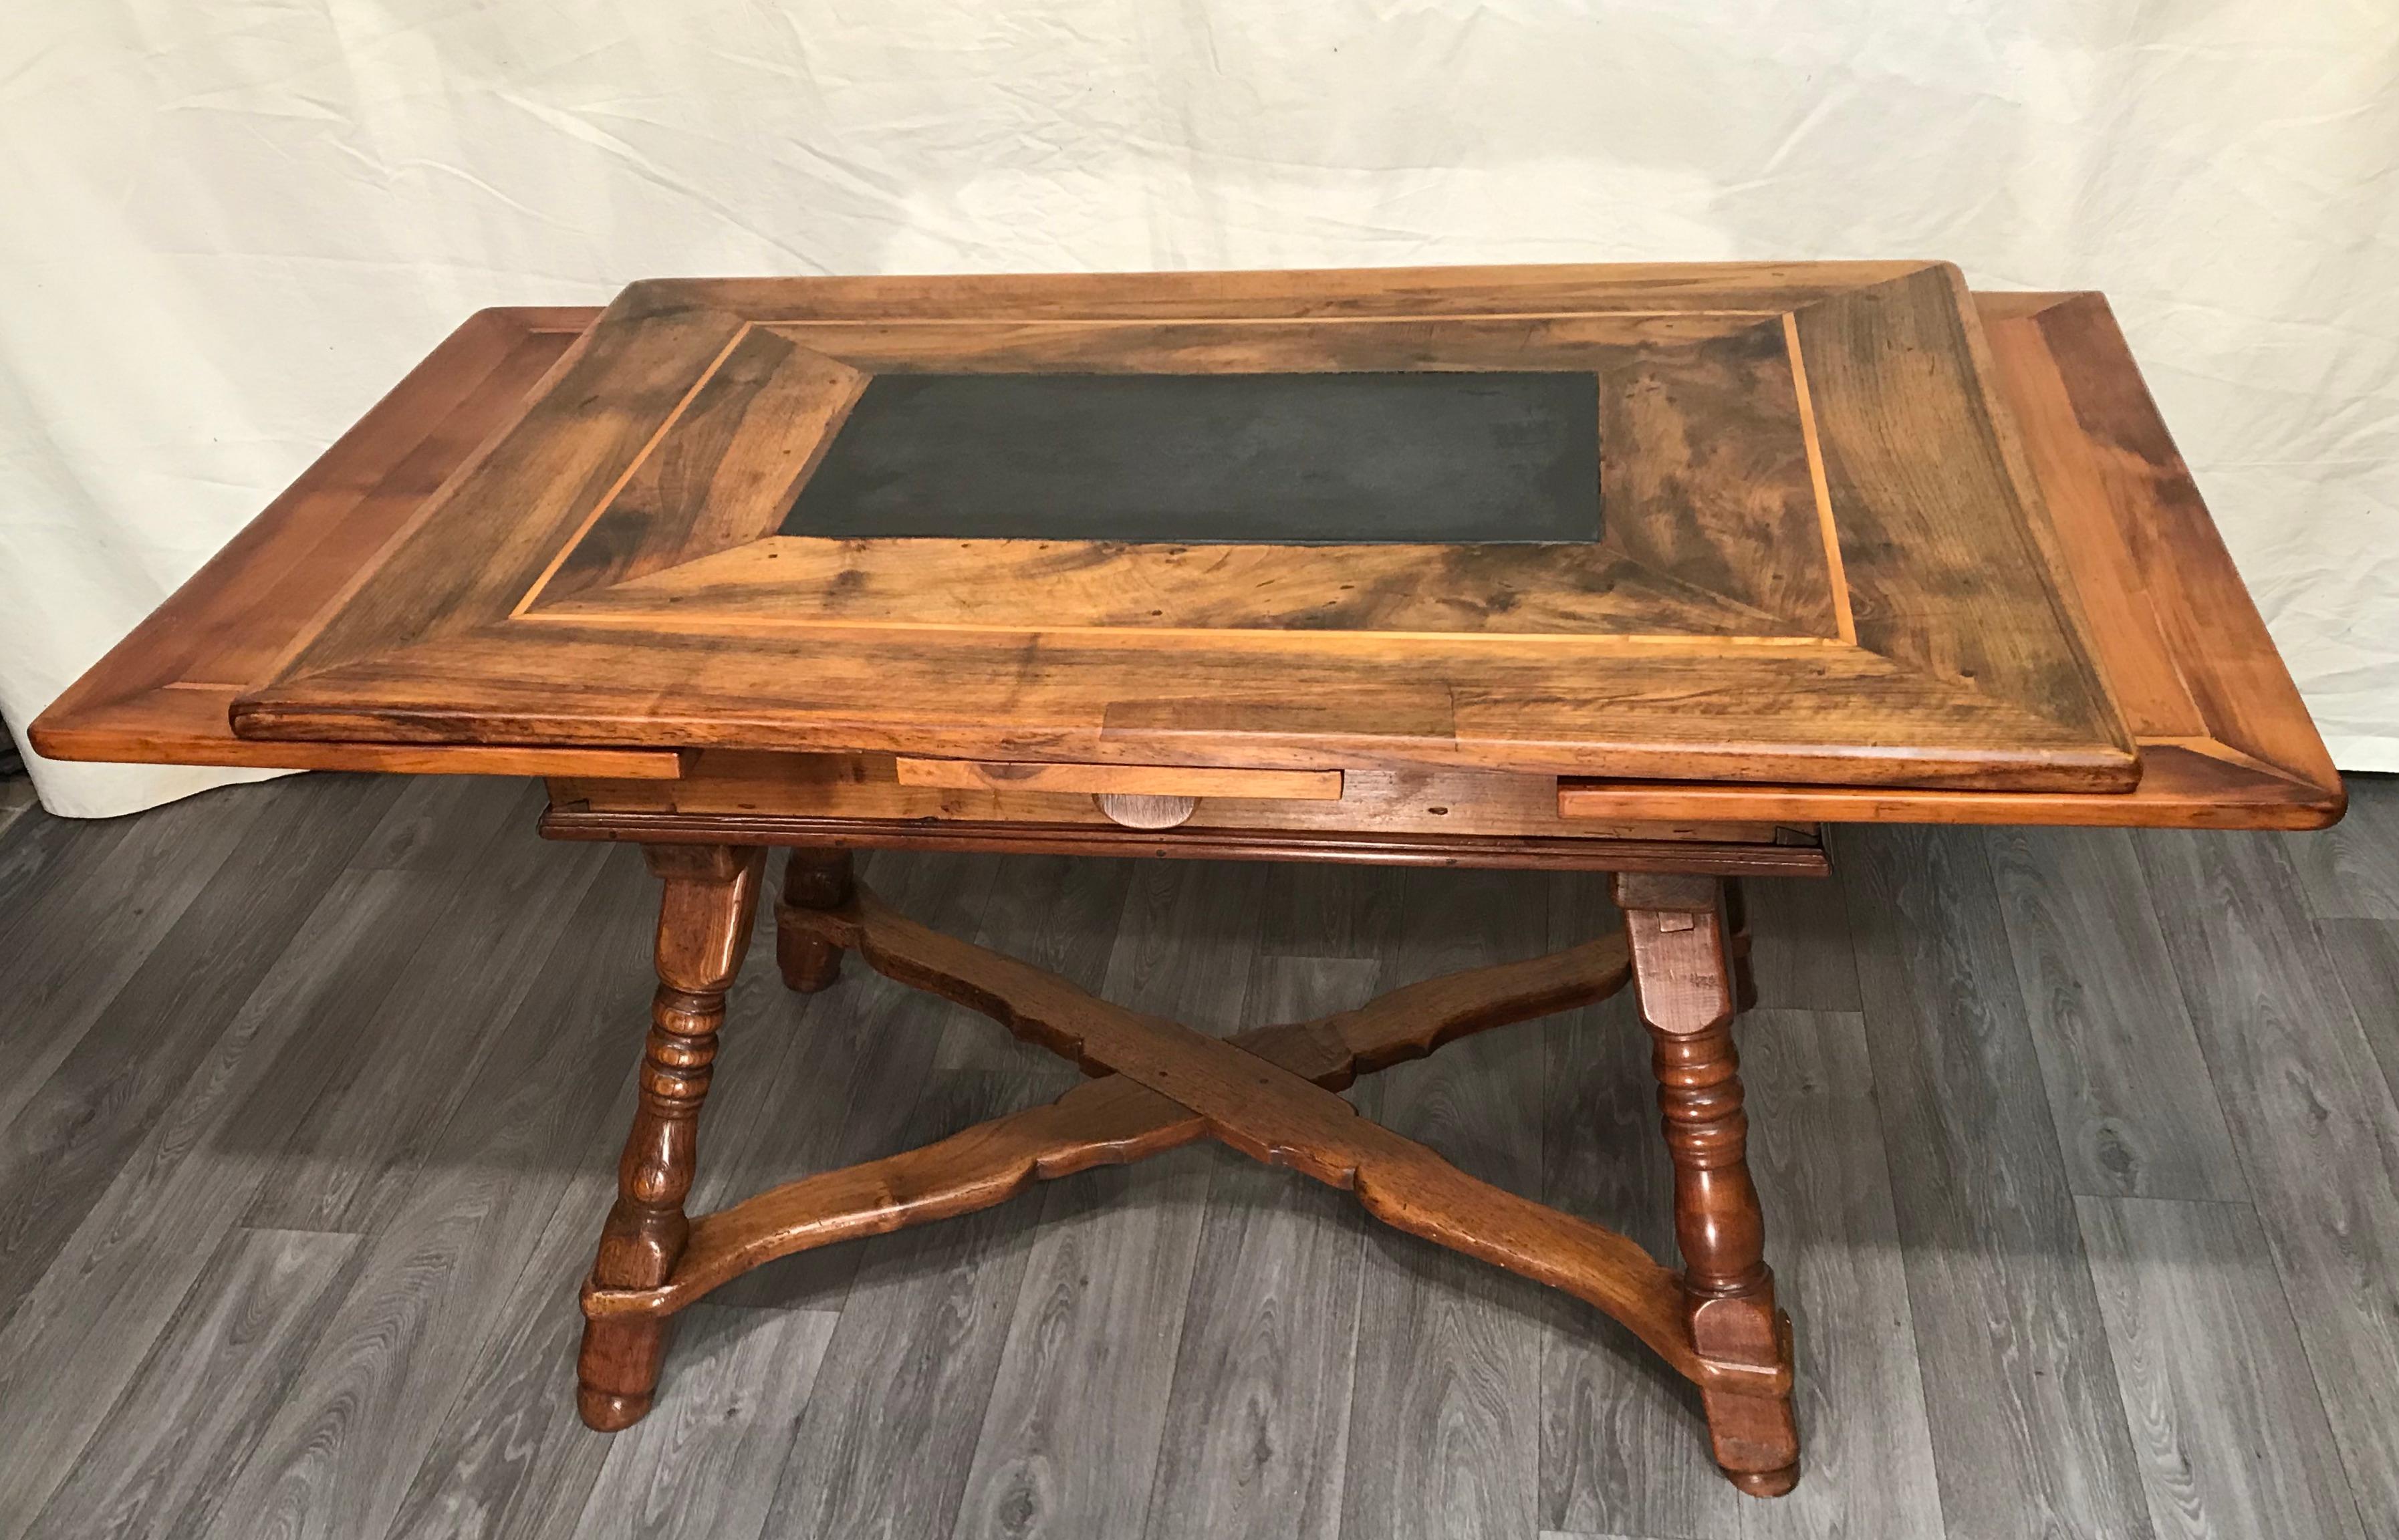 This extendable Swiss farm dining table of the 18th century is made of massive walnut. The center of the table has a slate slap. This is a typical detail of a Swiss rustic table of the 17th and 18th century. As a special feature this table is